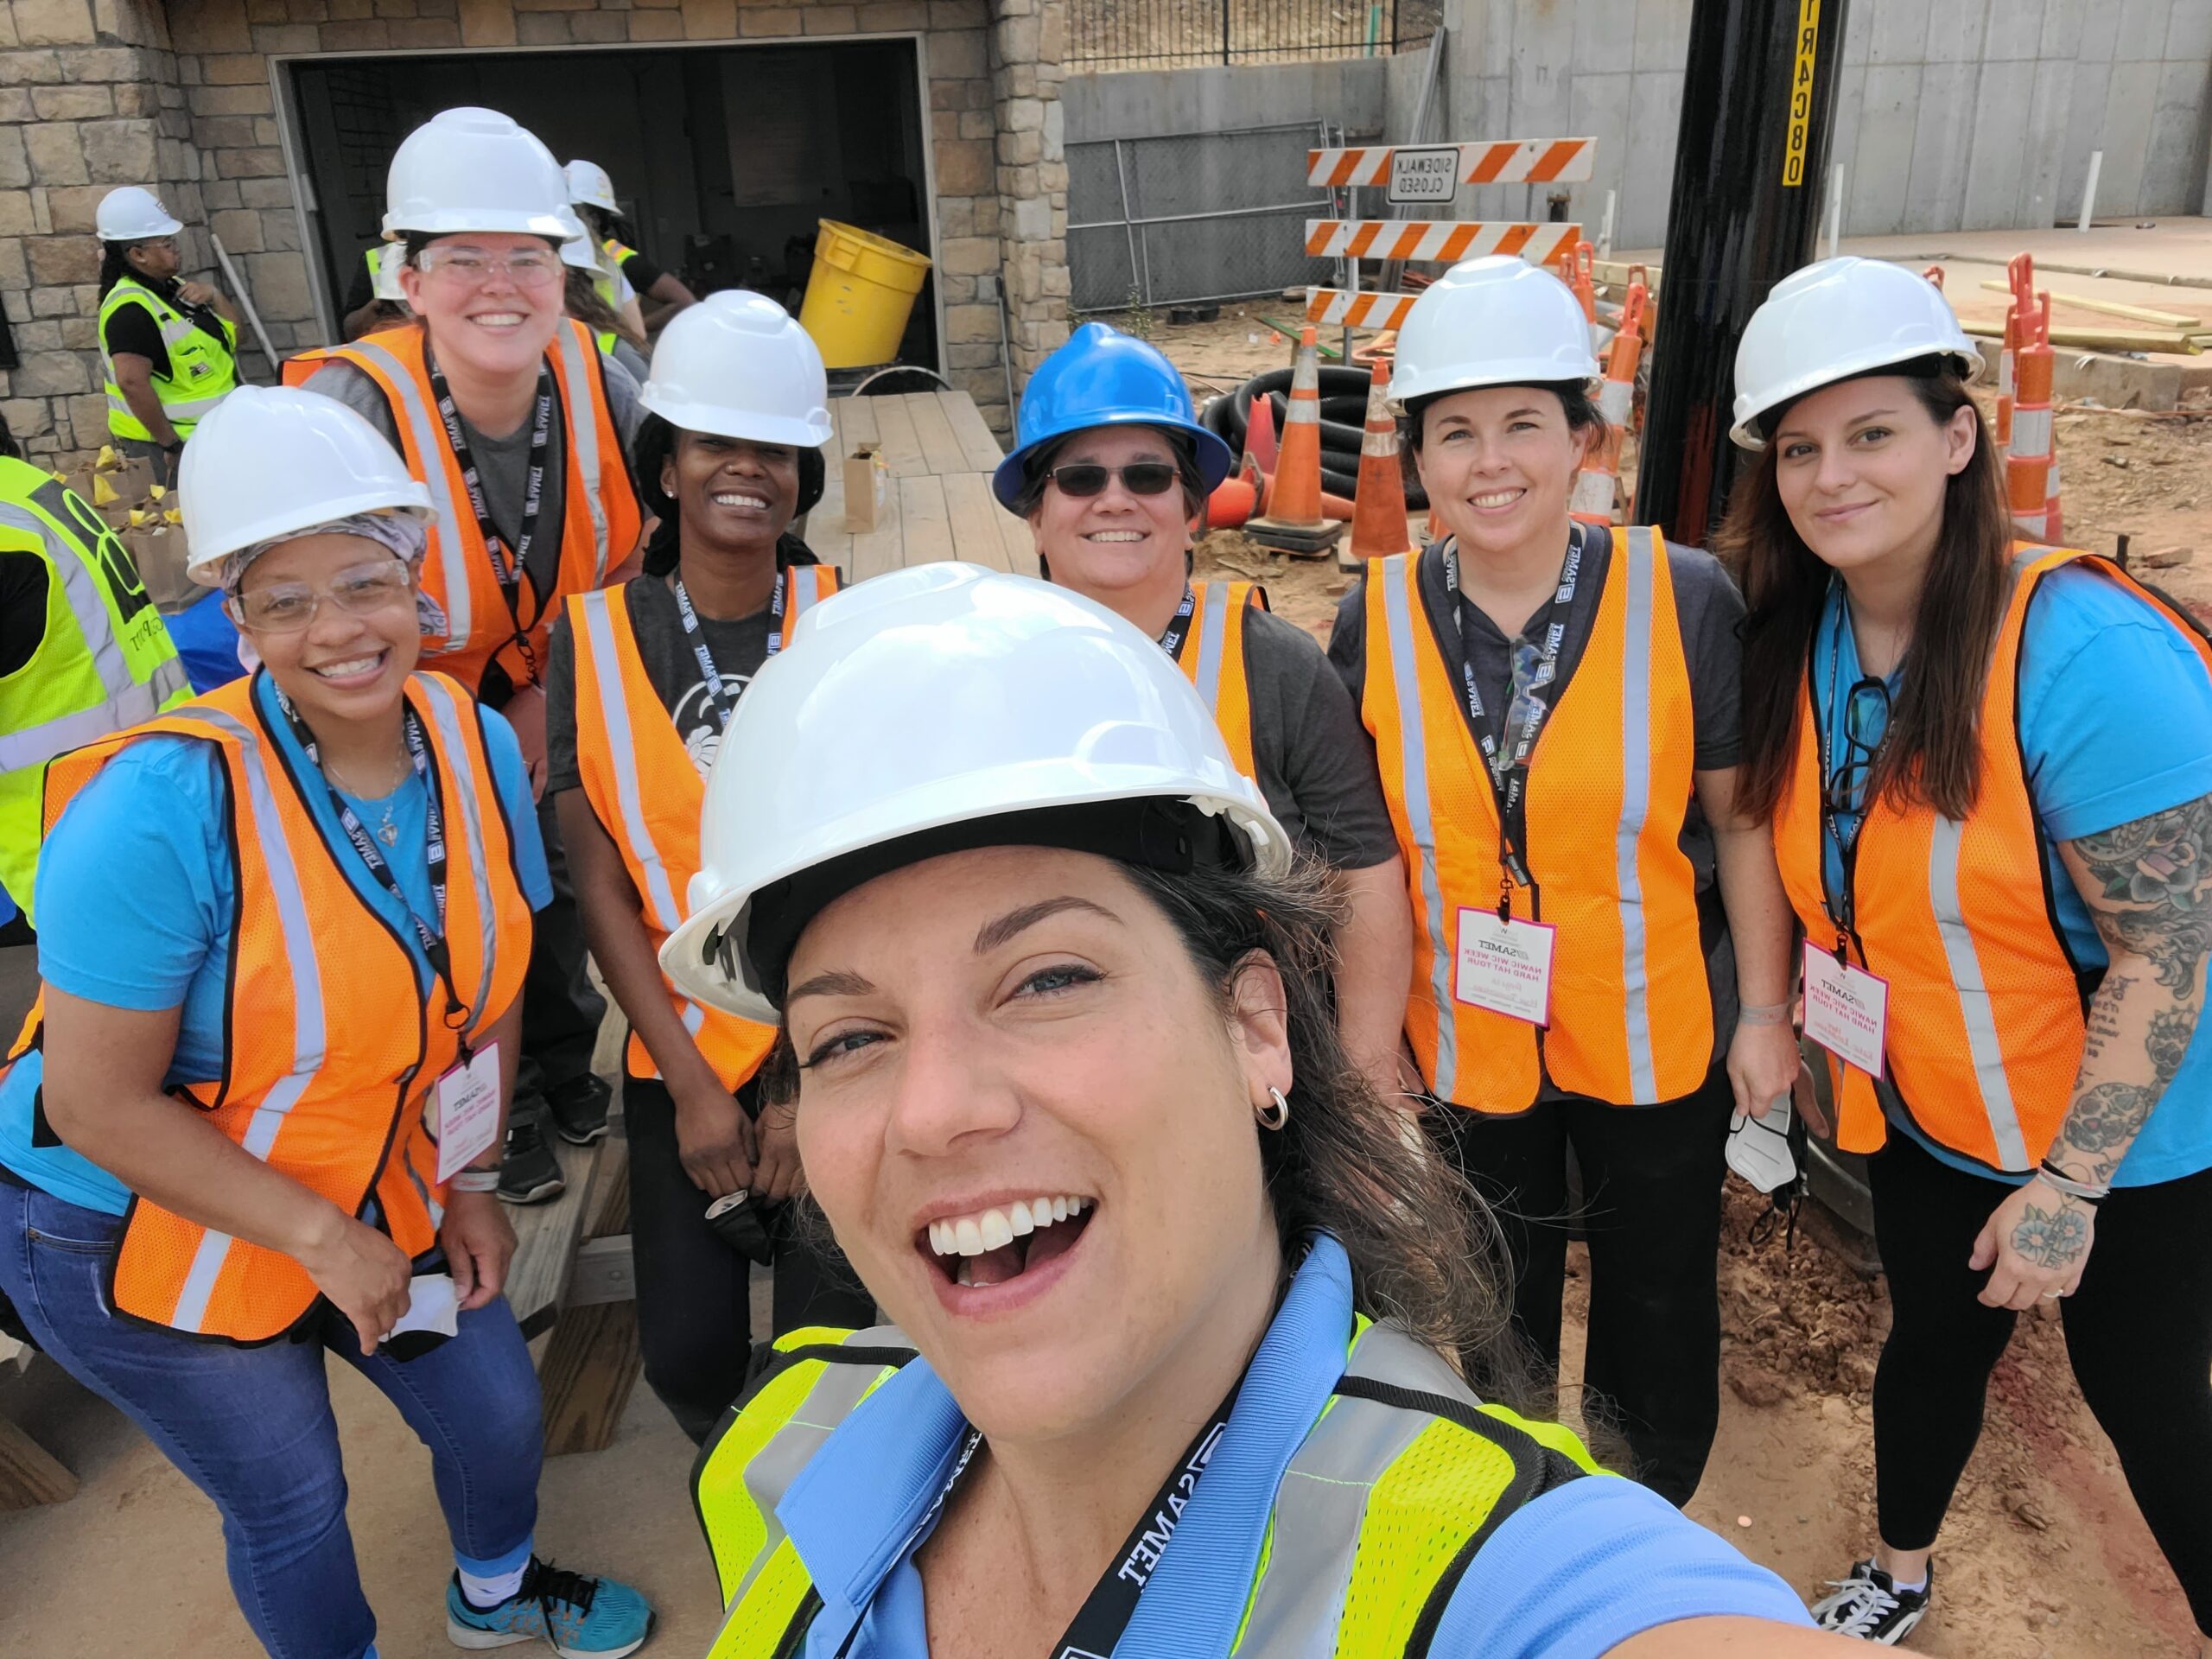 Nora El-Khouri Spencer and trainees pose for a group selfie